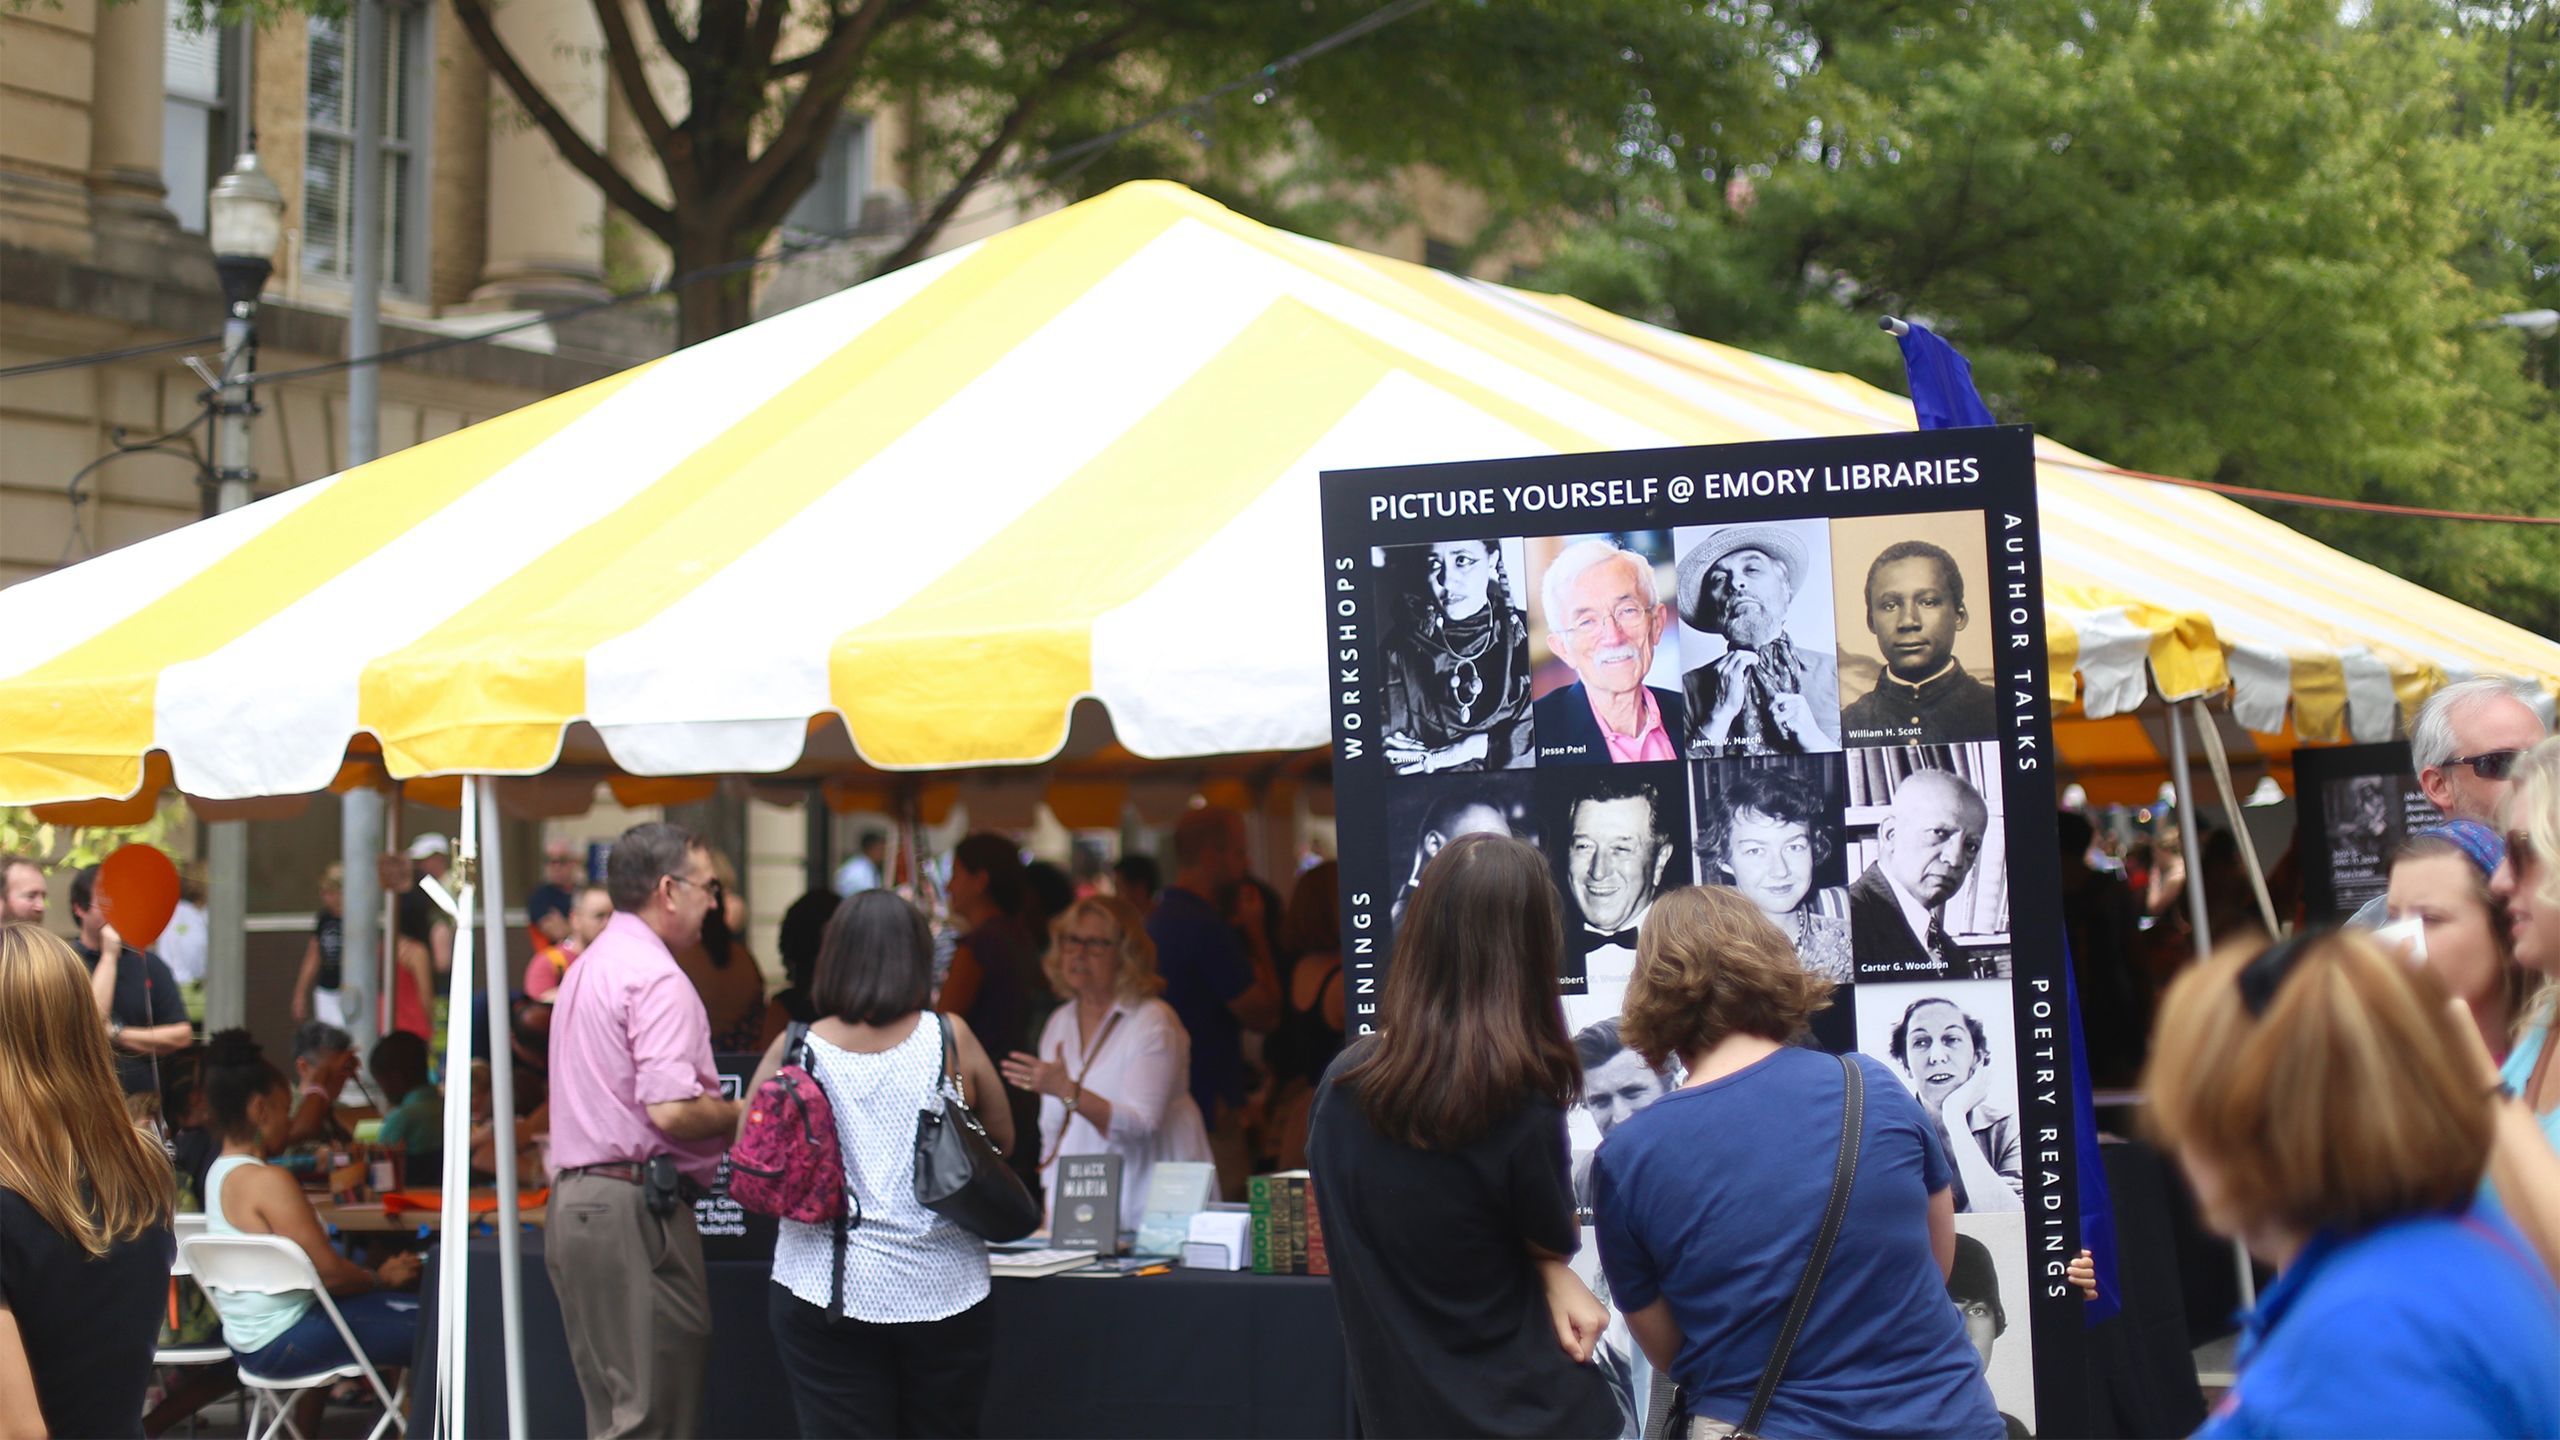 A crowd surrounds the Emory University tent at the Decatur Book Festival.